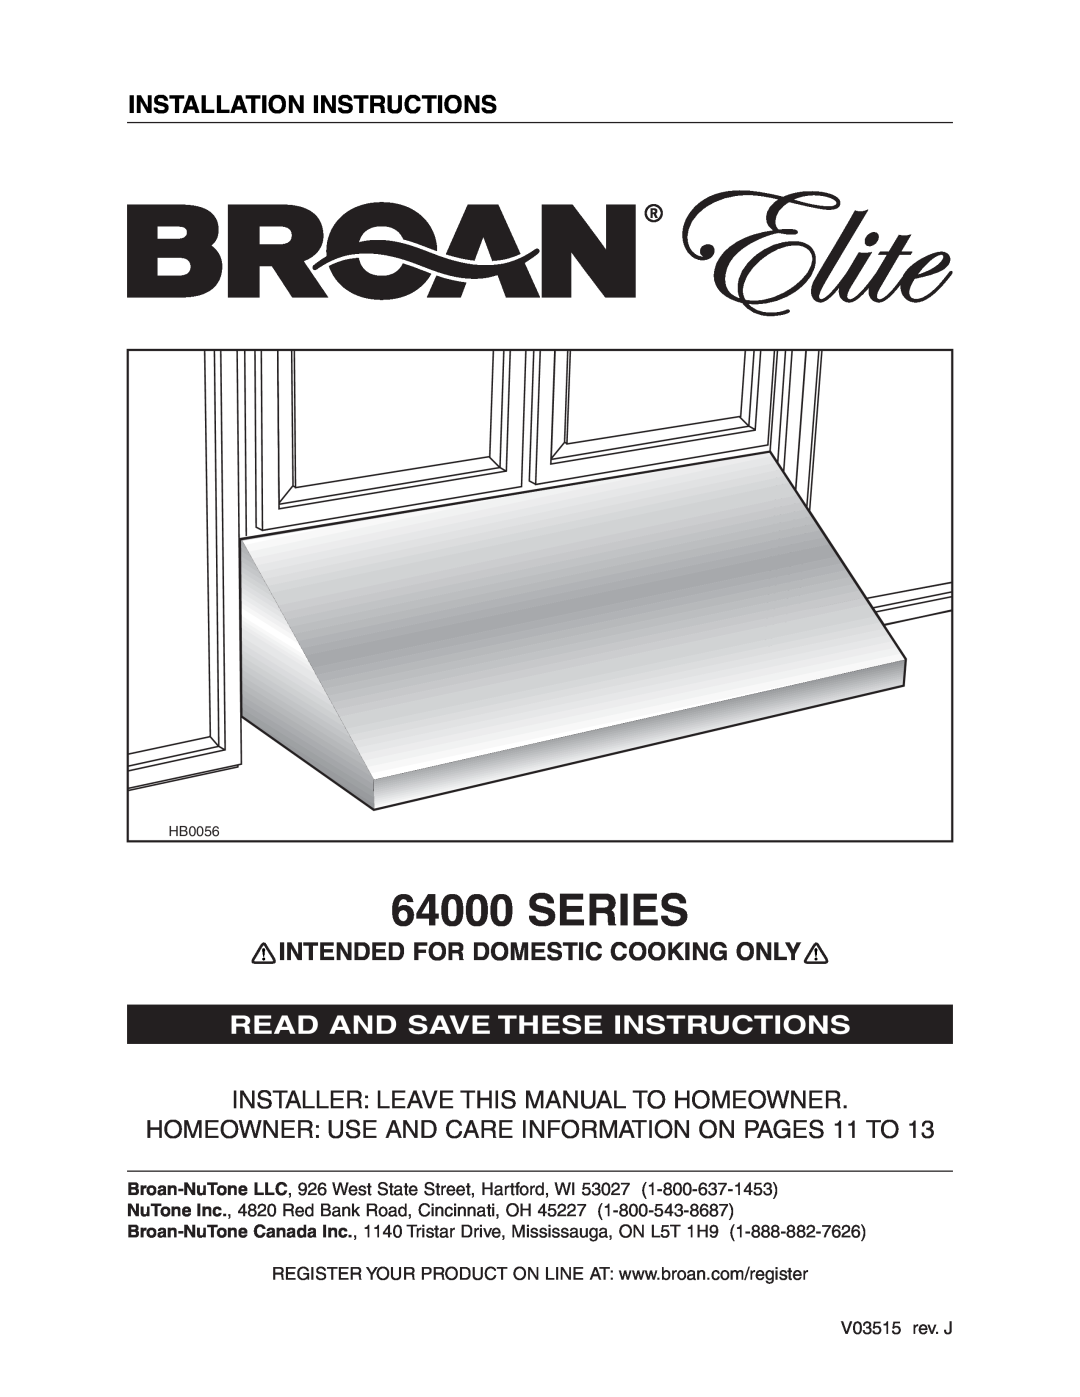 Broan 64000 installation instructions Series, Installation Instructions, Intended For Domestic Cooking Only 